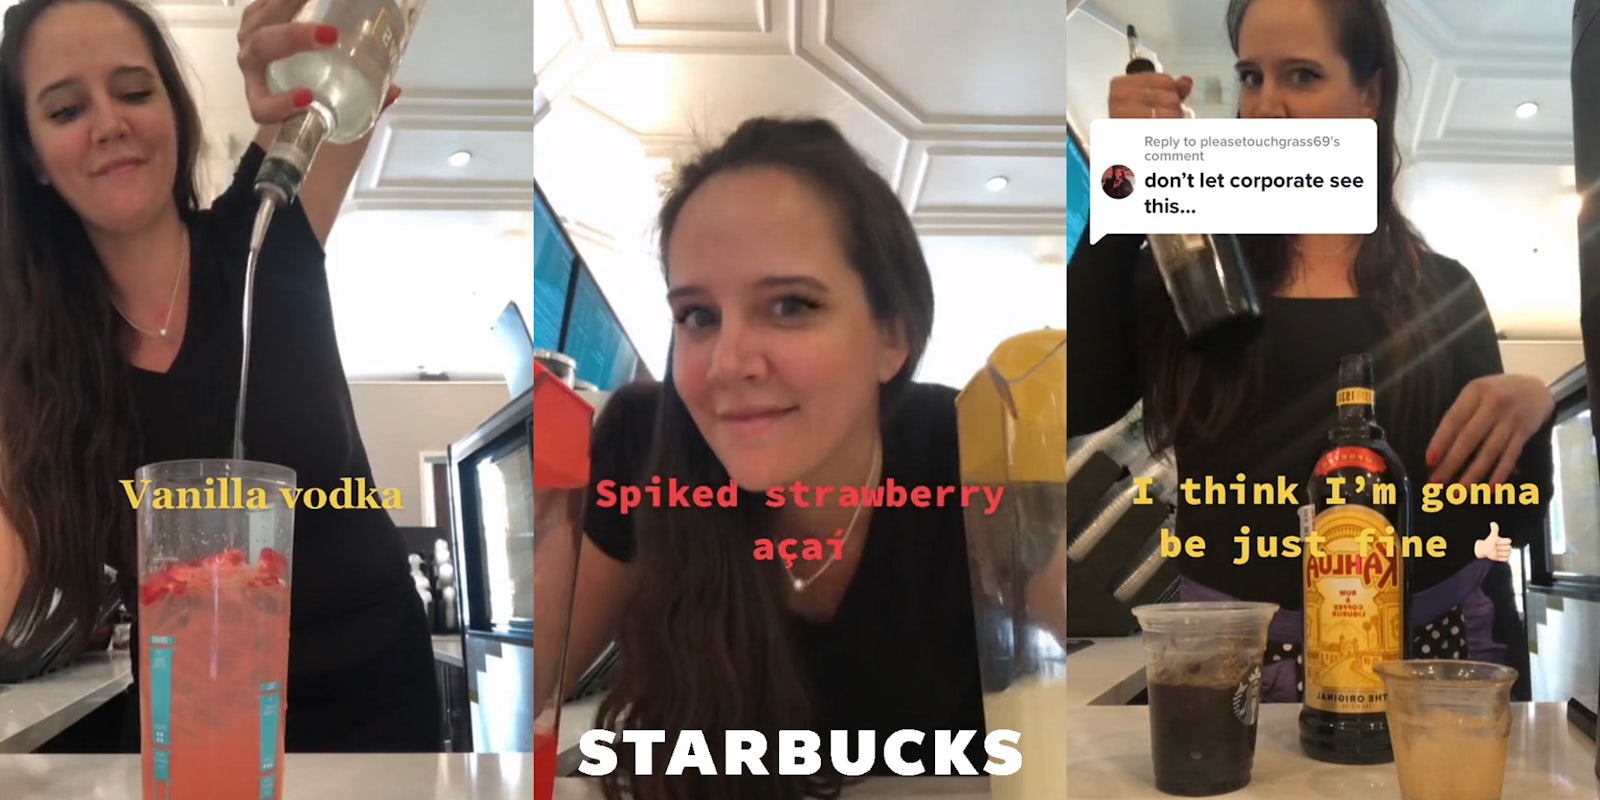 Starbucks employee adding vanilla vodka to strawberry refresher with caption 'Vanilla vodka' (l) Starbucks employee with caption 'Spiked strawberry acai' with Starbucks logo at bottom (c) Starbucks employee making drink with caption 'don't let corporate see this... I think I'm gonna be just fine' (r)